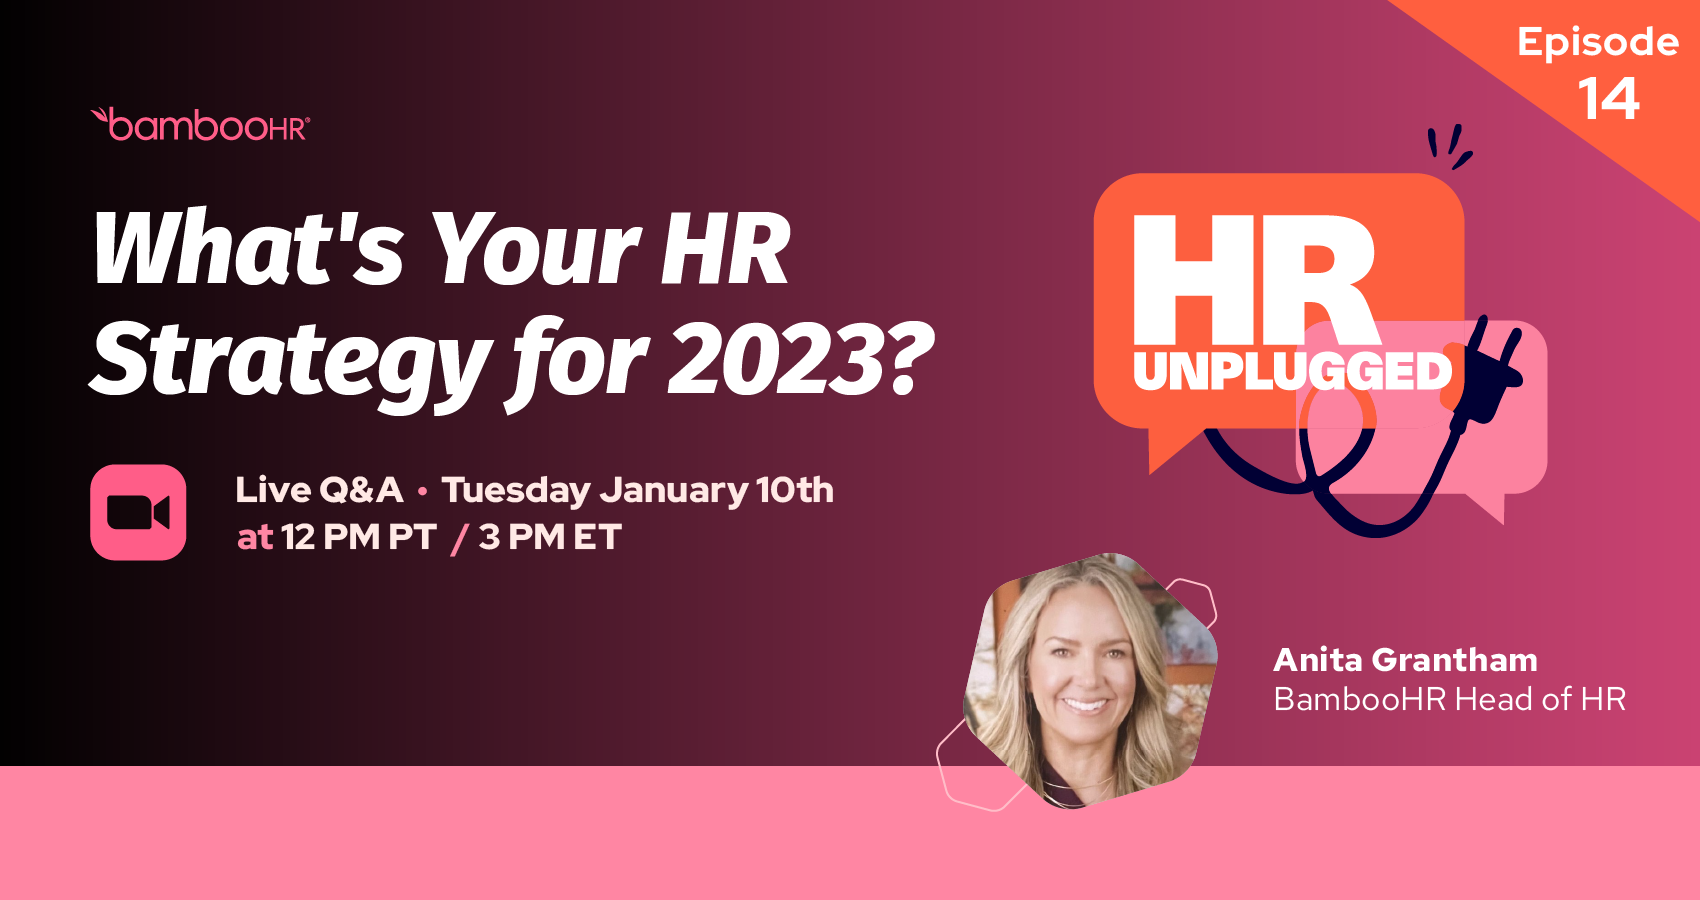 Episode 14: What's Your HR Strategy for 2023?